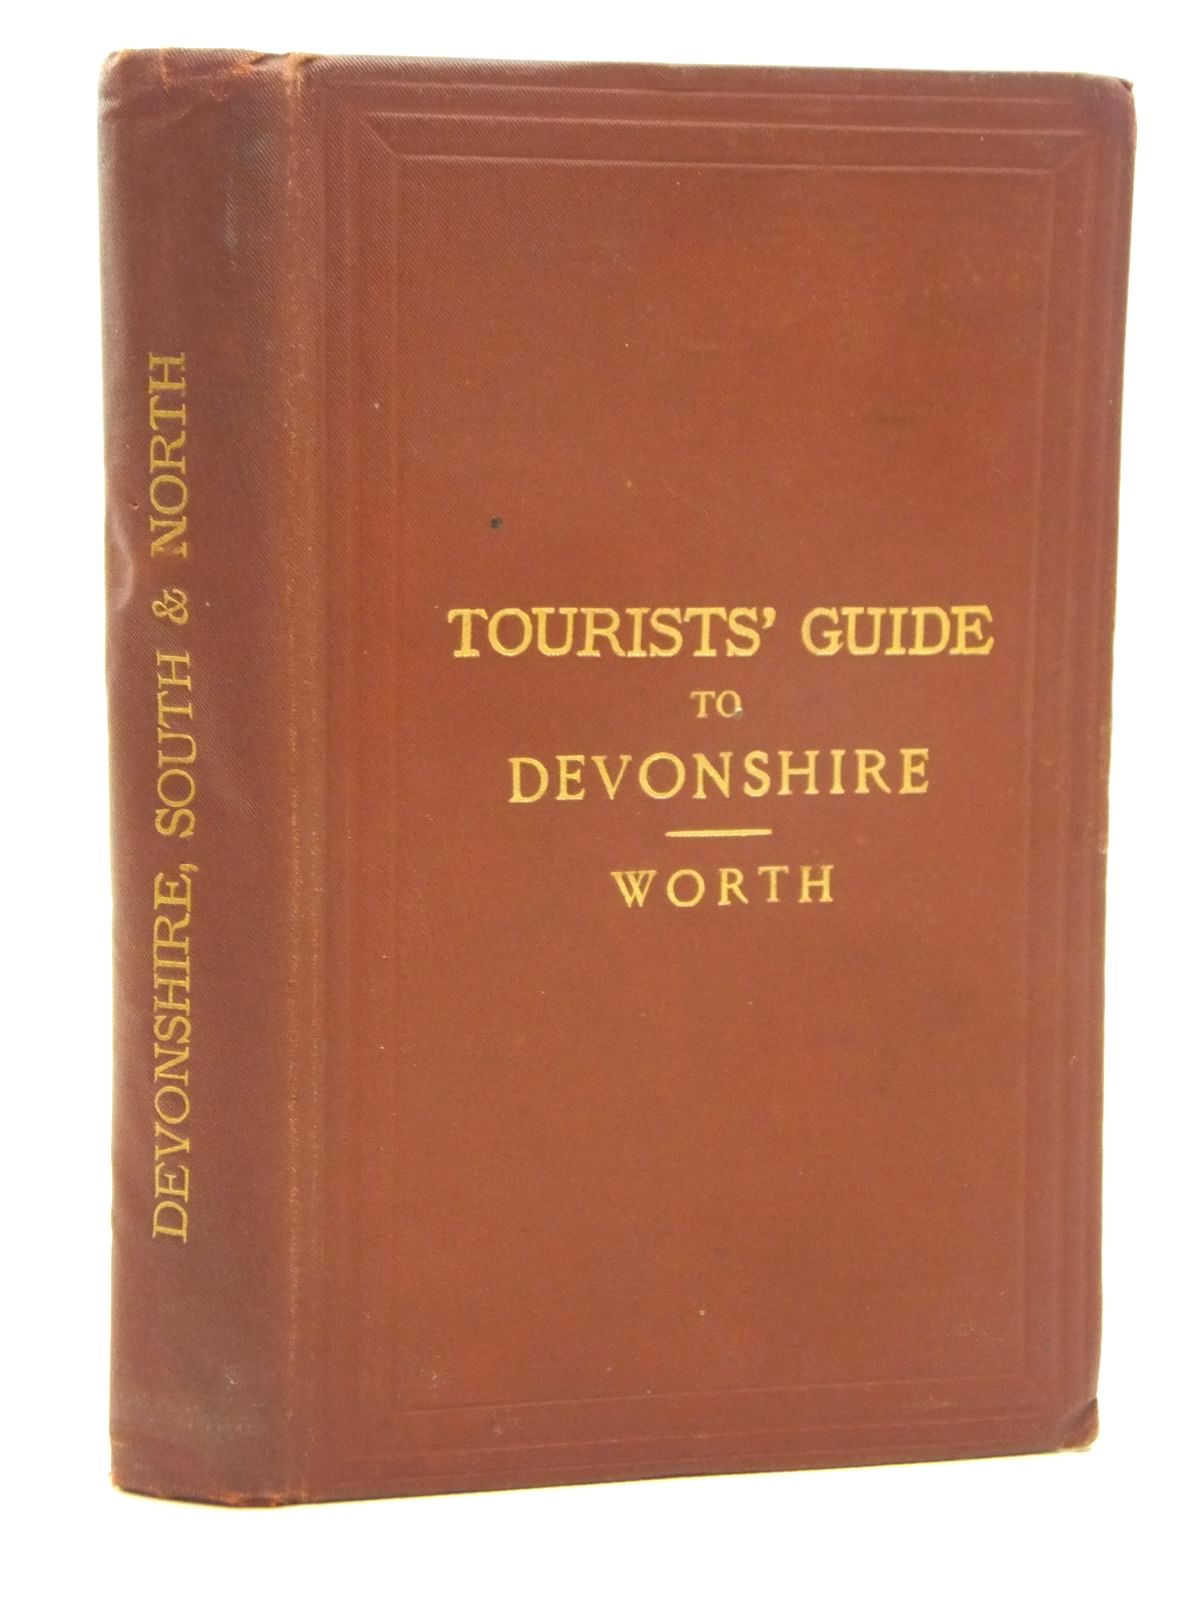 Photo of TOURIST'S GUIDE TO DEVONSHIRE written by Worth, R.N. published by Edward Stanford (STOCK CODE: 1609463)  for sale by Stella & Rose's Books